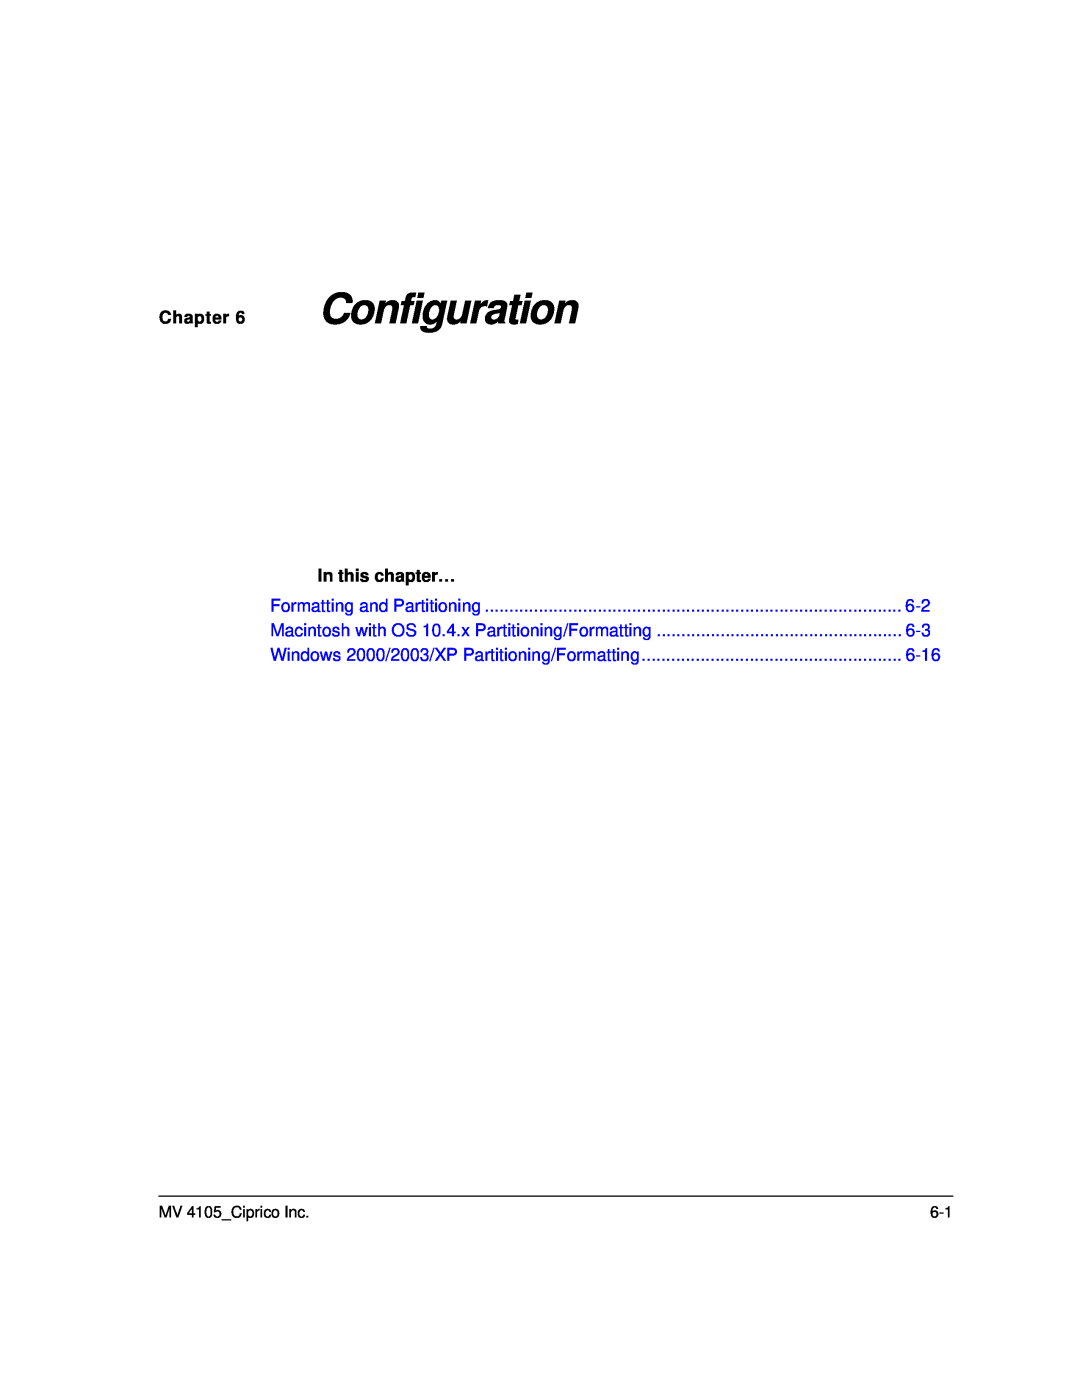 Ciprico 4105 Series Configuration, Formatting and Partitioning, Macintosh with OS 10.4.x Partitioning/Formatting 